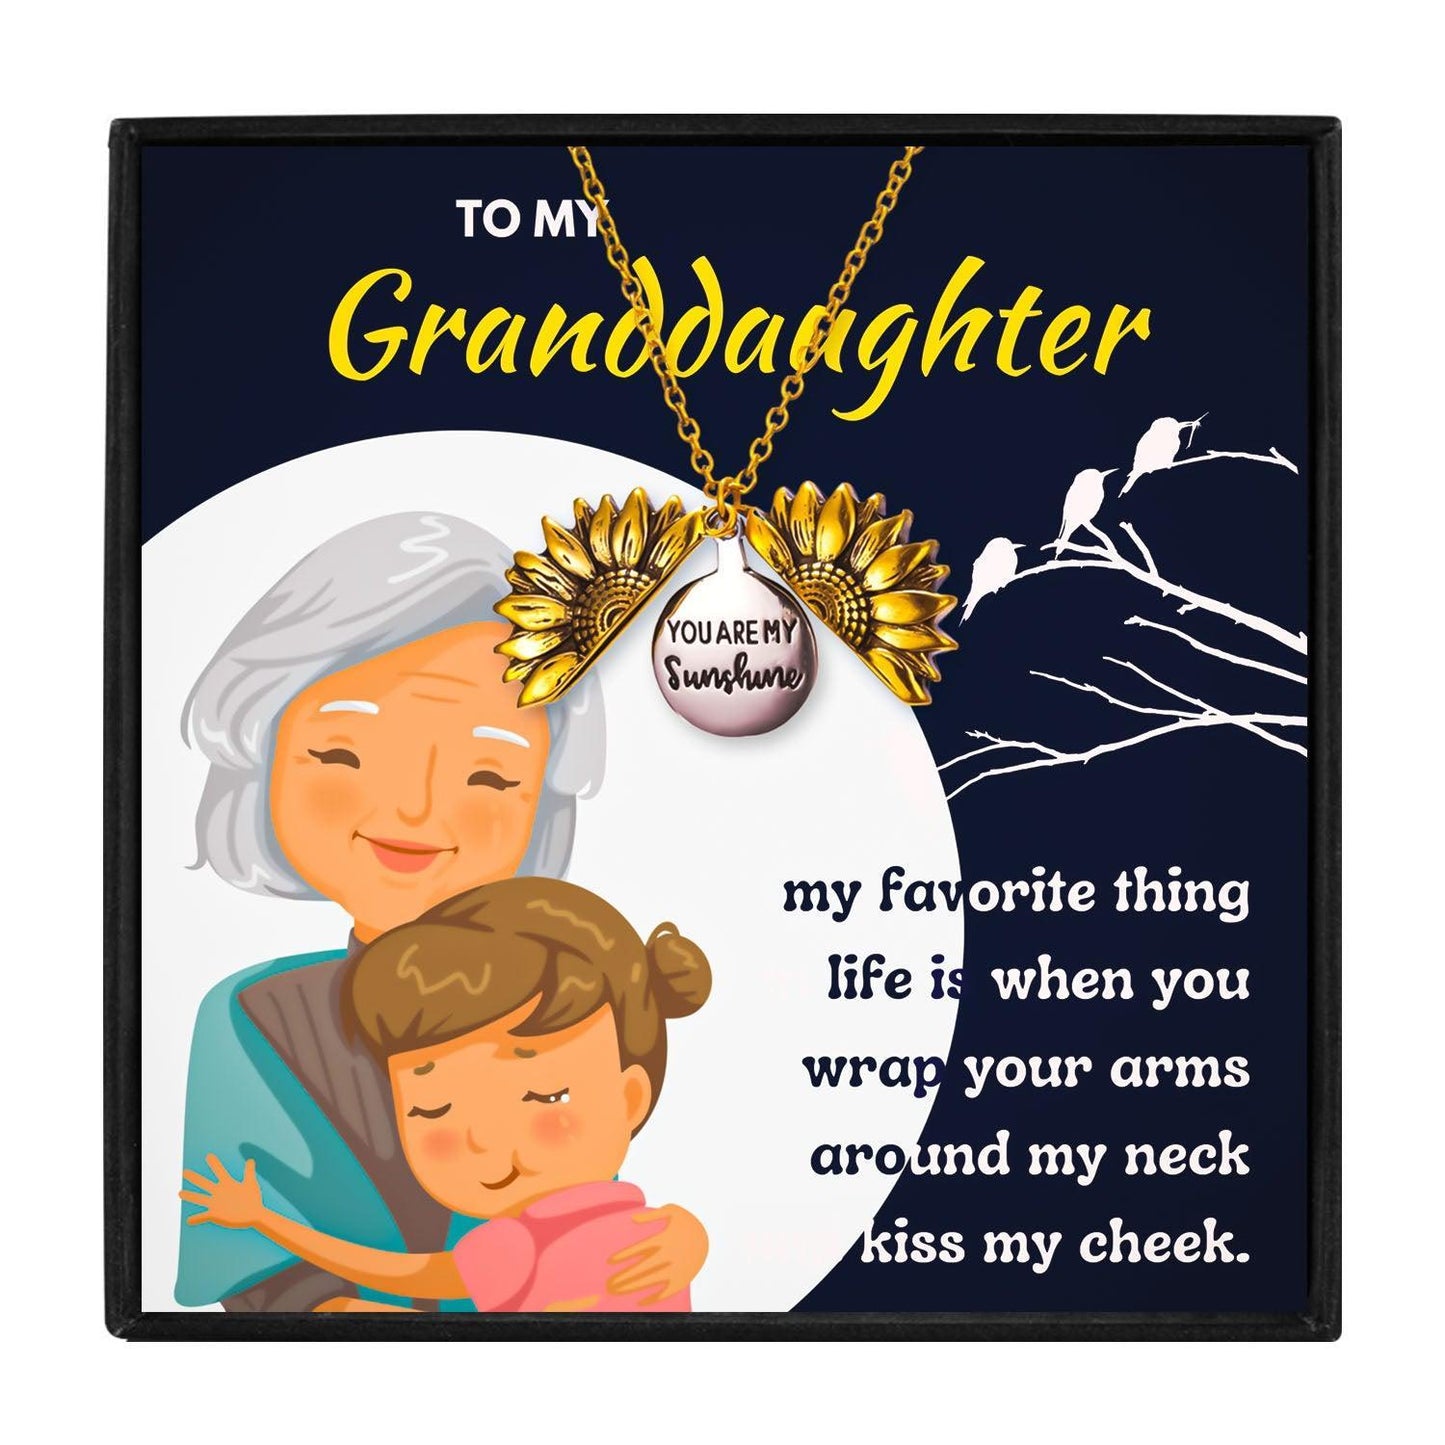 Meaningful Granddaughter Gifts From Grandparents in 2023 | Meaningful Granddaughter Gifts From Grandparents - undefined | granddaughter gift, granddaughter gifts from nana, granddaughter necklace from grandma, grandma granddaughter necklace, personalized granddaughter jewelry, to my granddaughter necklace | From Hunny Life | hunnylife.com